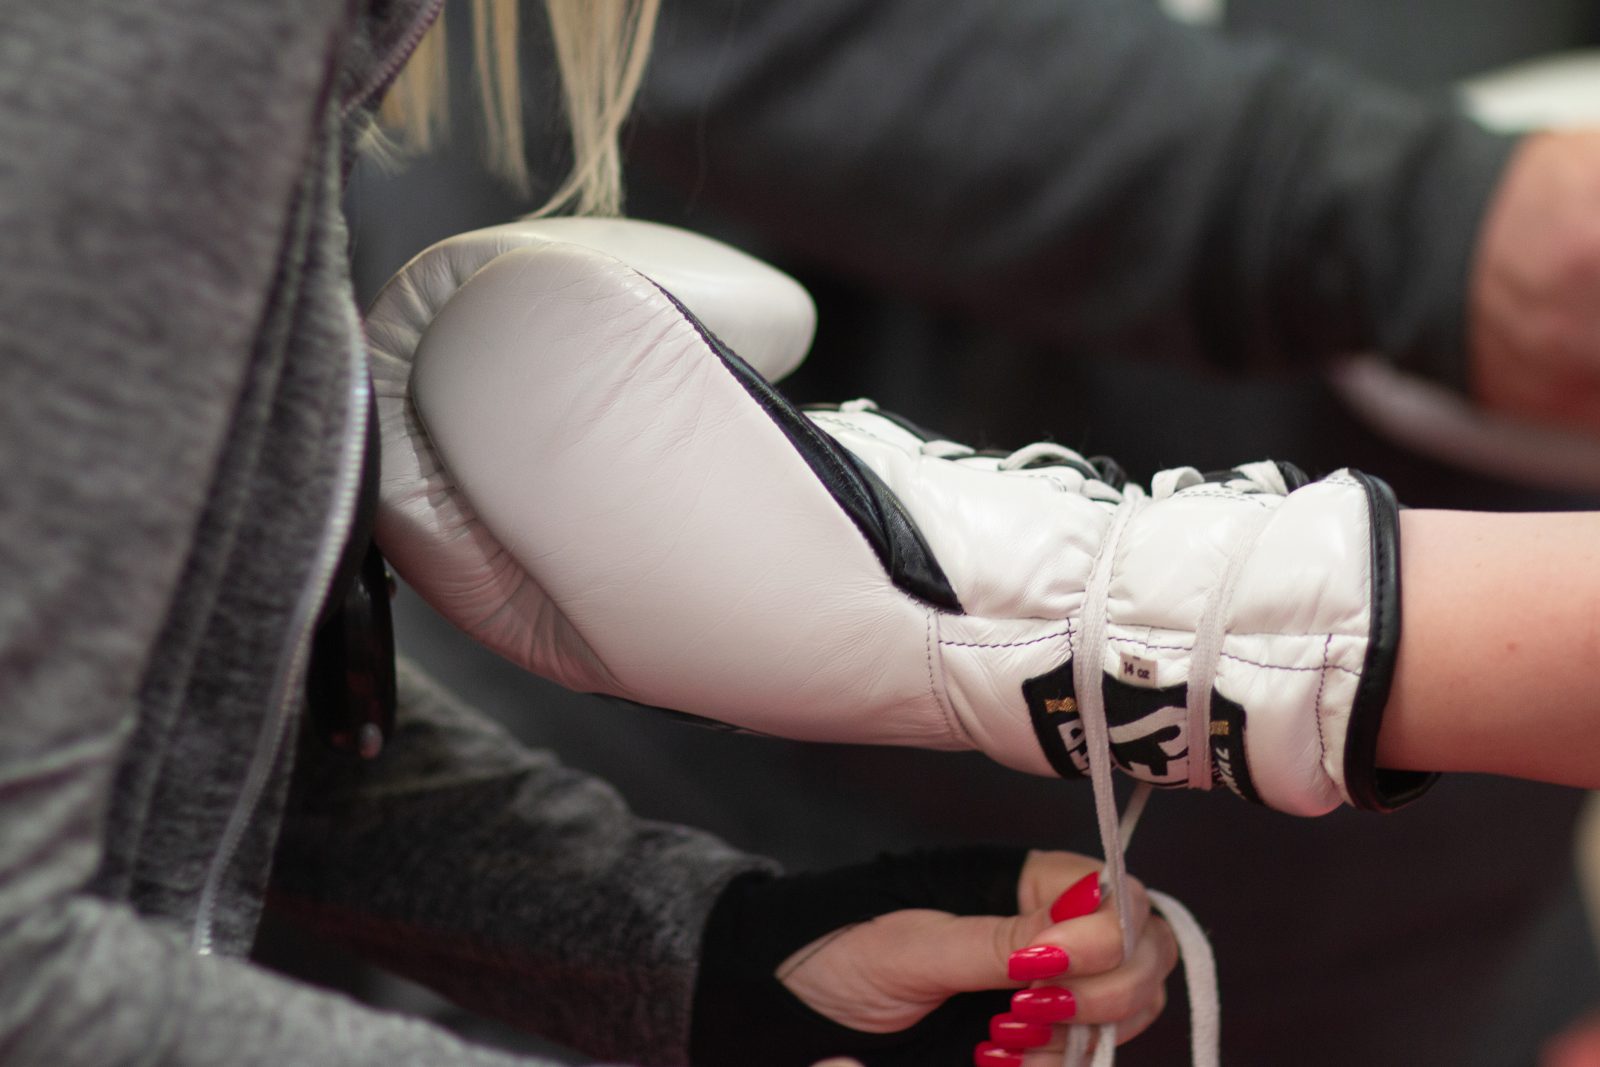 A person with bright red nails ties the laces on a white boxing glove.